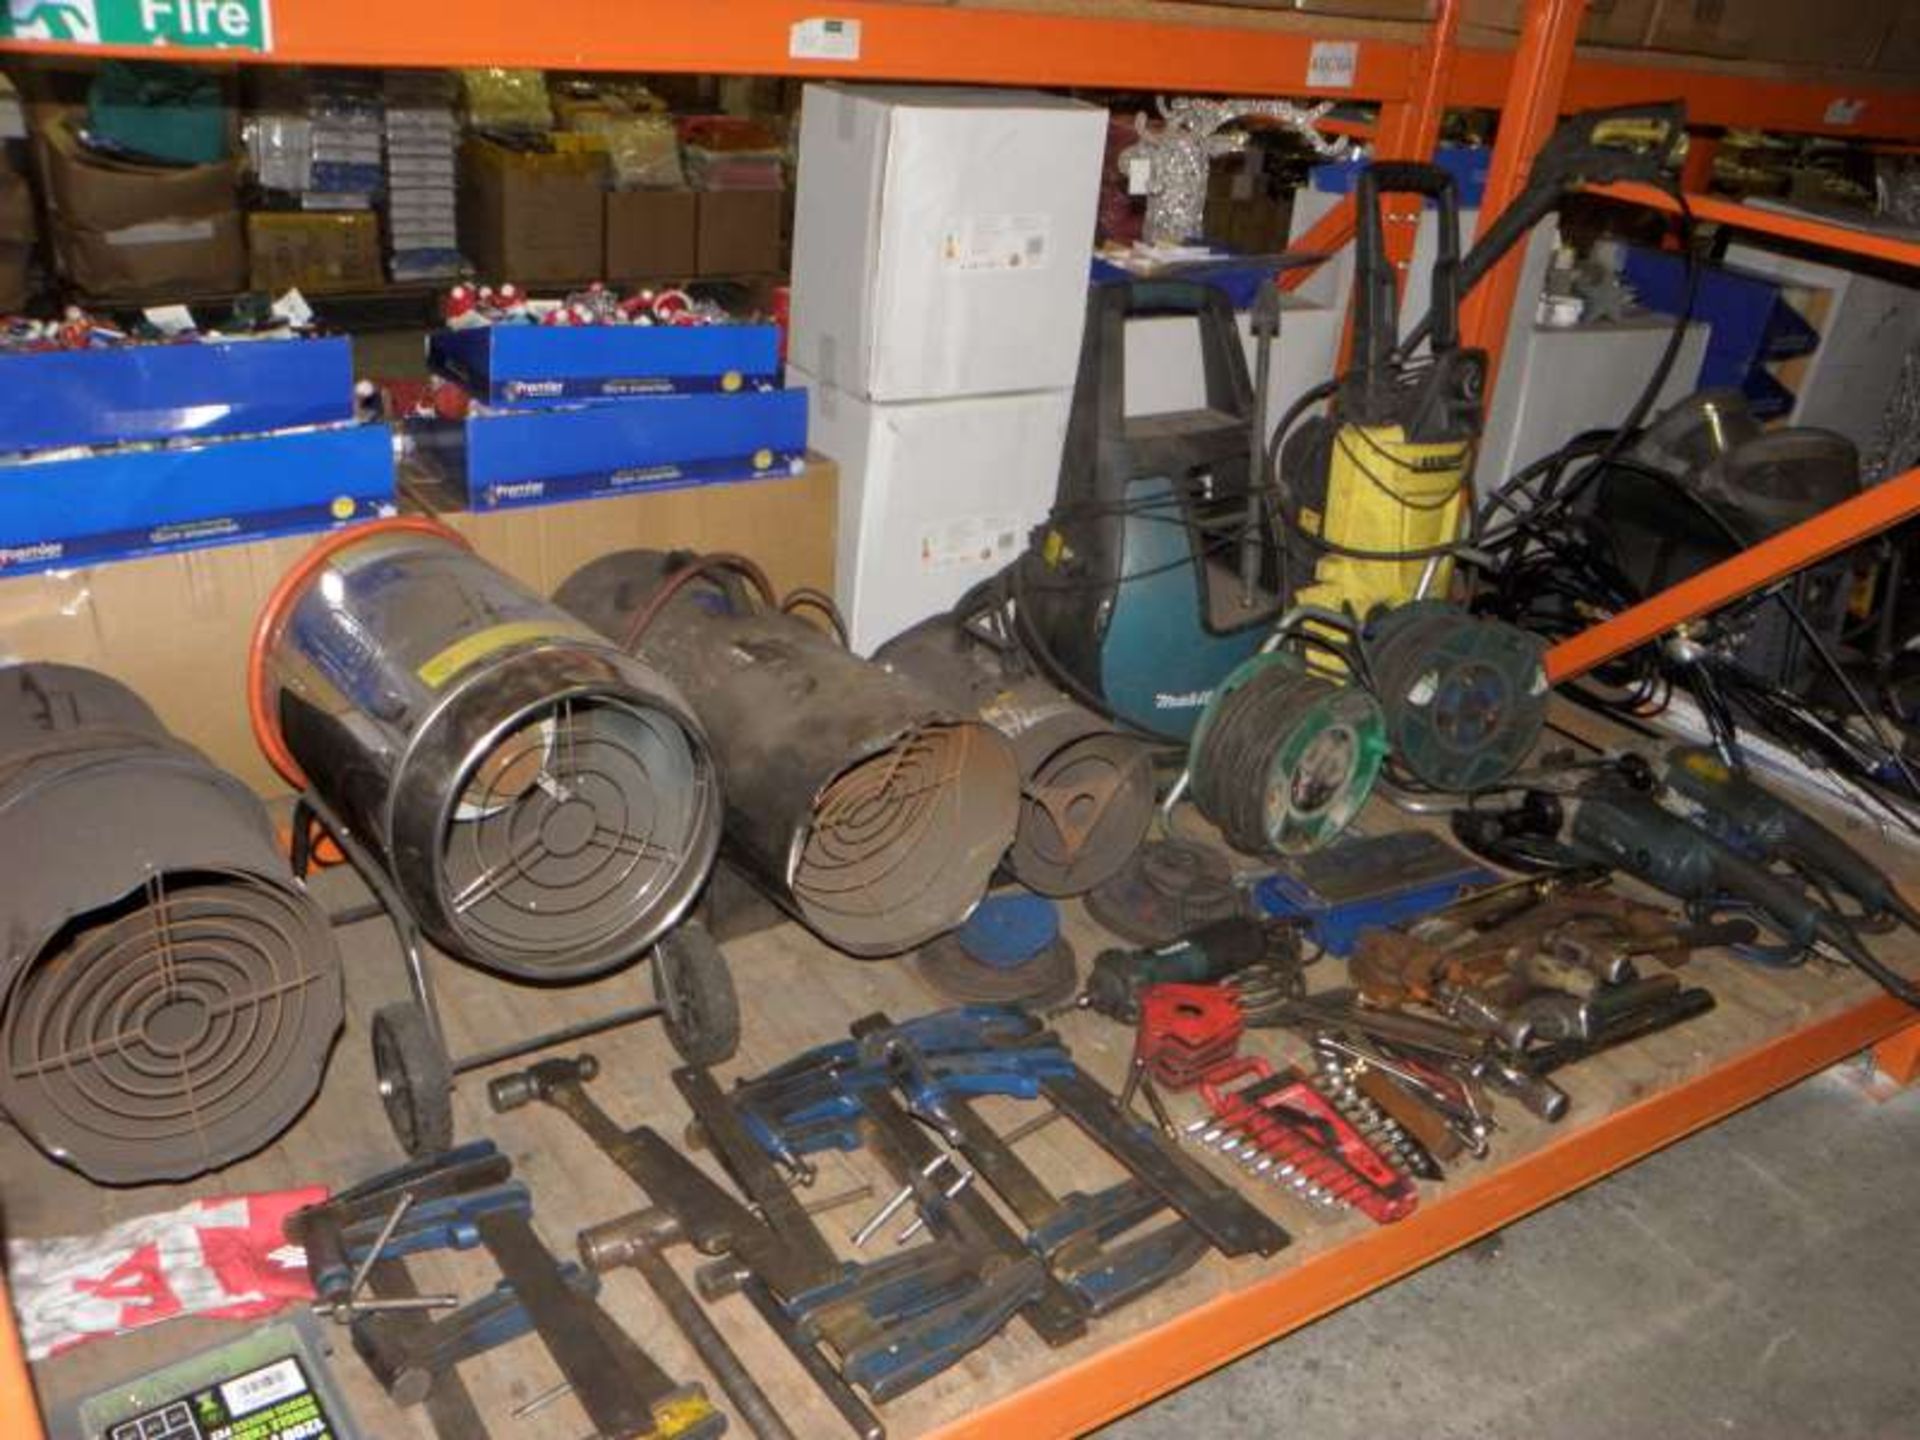 LOT CONTAINING JET WASHERS, SPACE HEATERS, CLAMPS, GRIUNDERS, EXTENSION LEADS, SPANNERS ETC